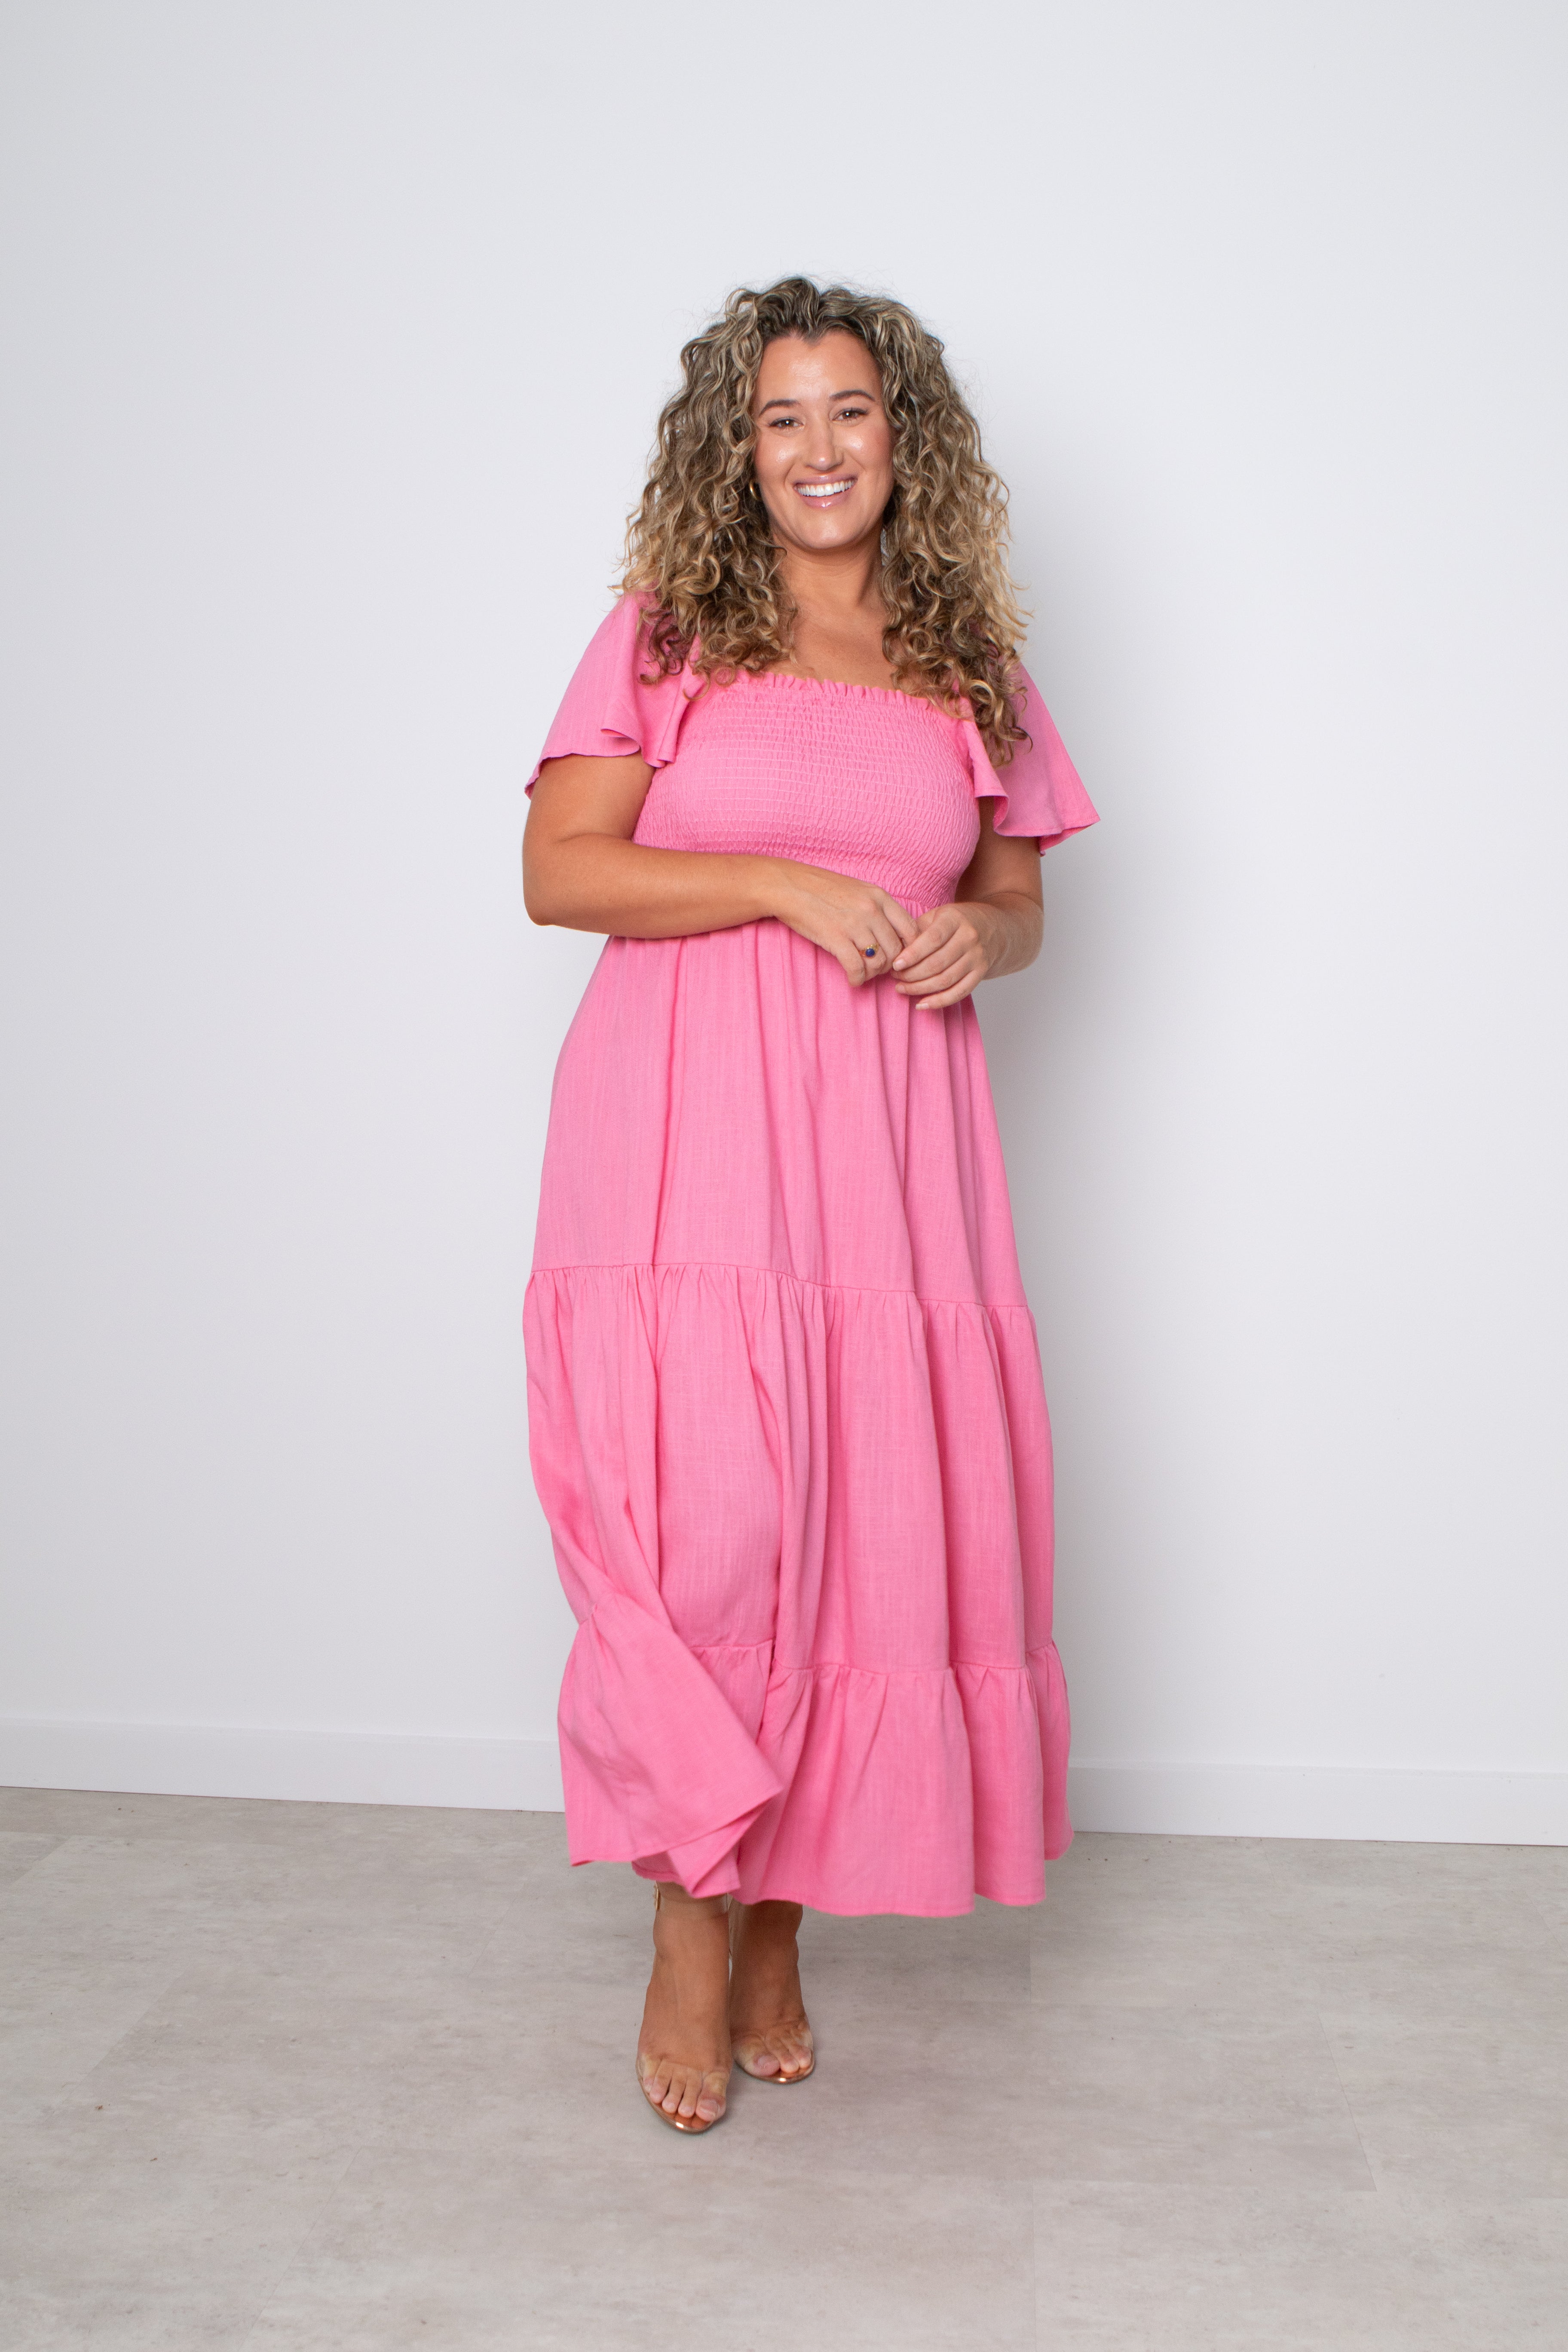 Make a statement in the Alena Dress. Our Alena Dress can be worn on or off the shoulder with a shirred bodice falling into a maxi length dress. The perfect elegant evening outfit or pair her with your fav sneakers for a more causal weekend style. The perfect wedding guest dress or bump friendly dress for pregnant mums.